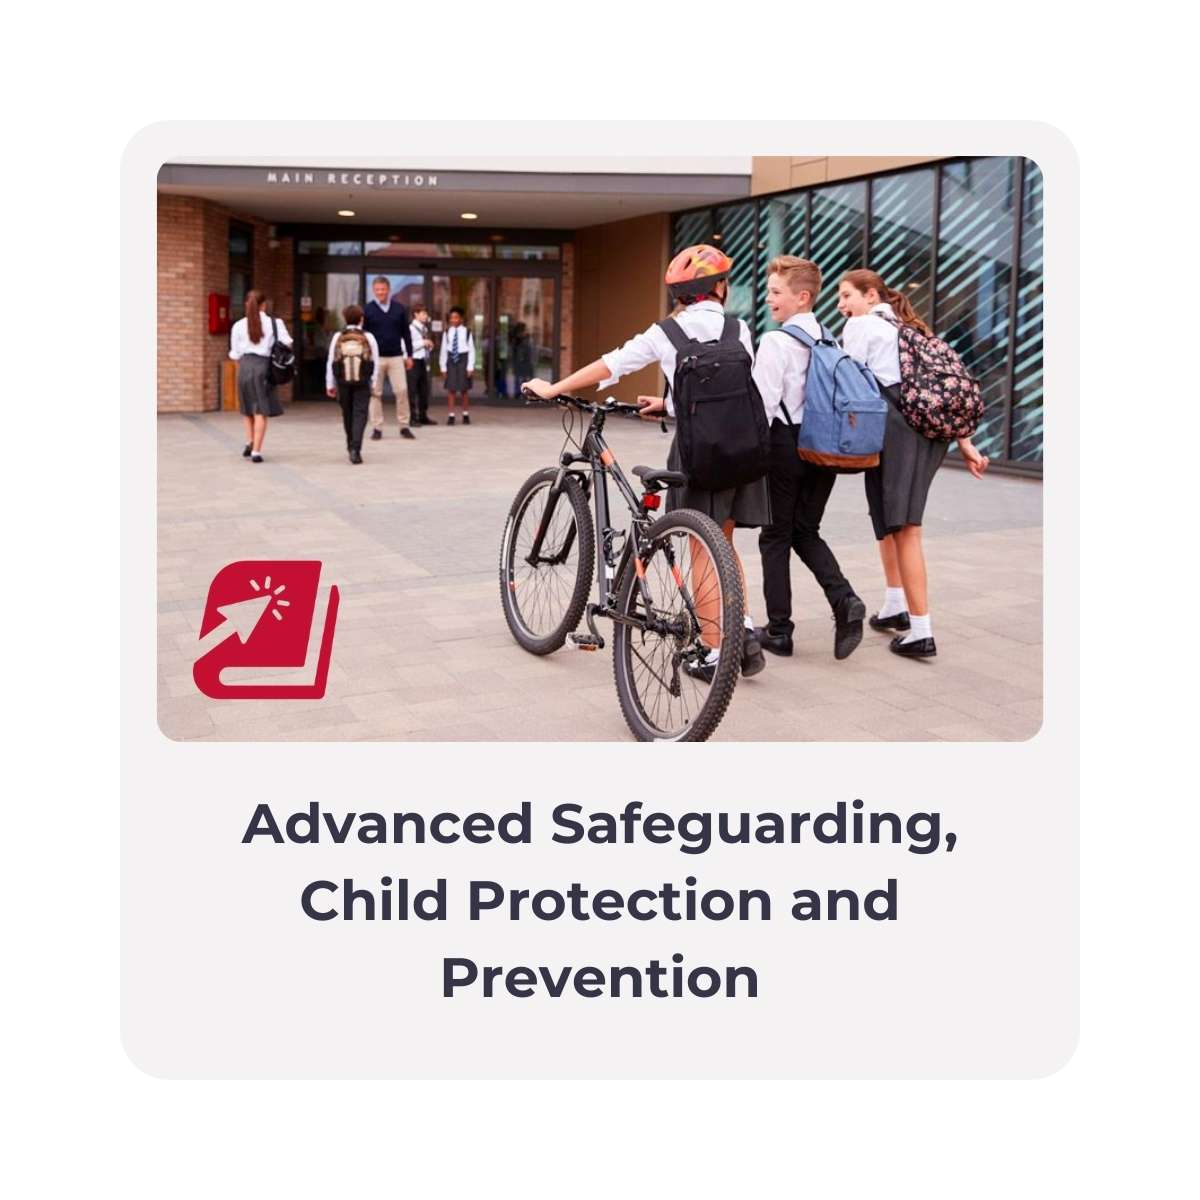 Advanced Safeguarding, Child Protection and Prevention